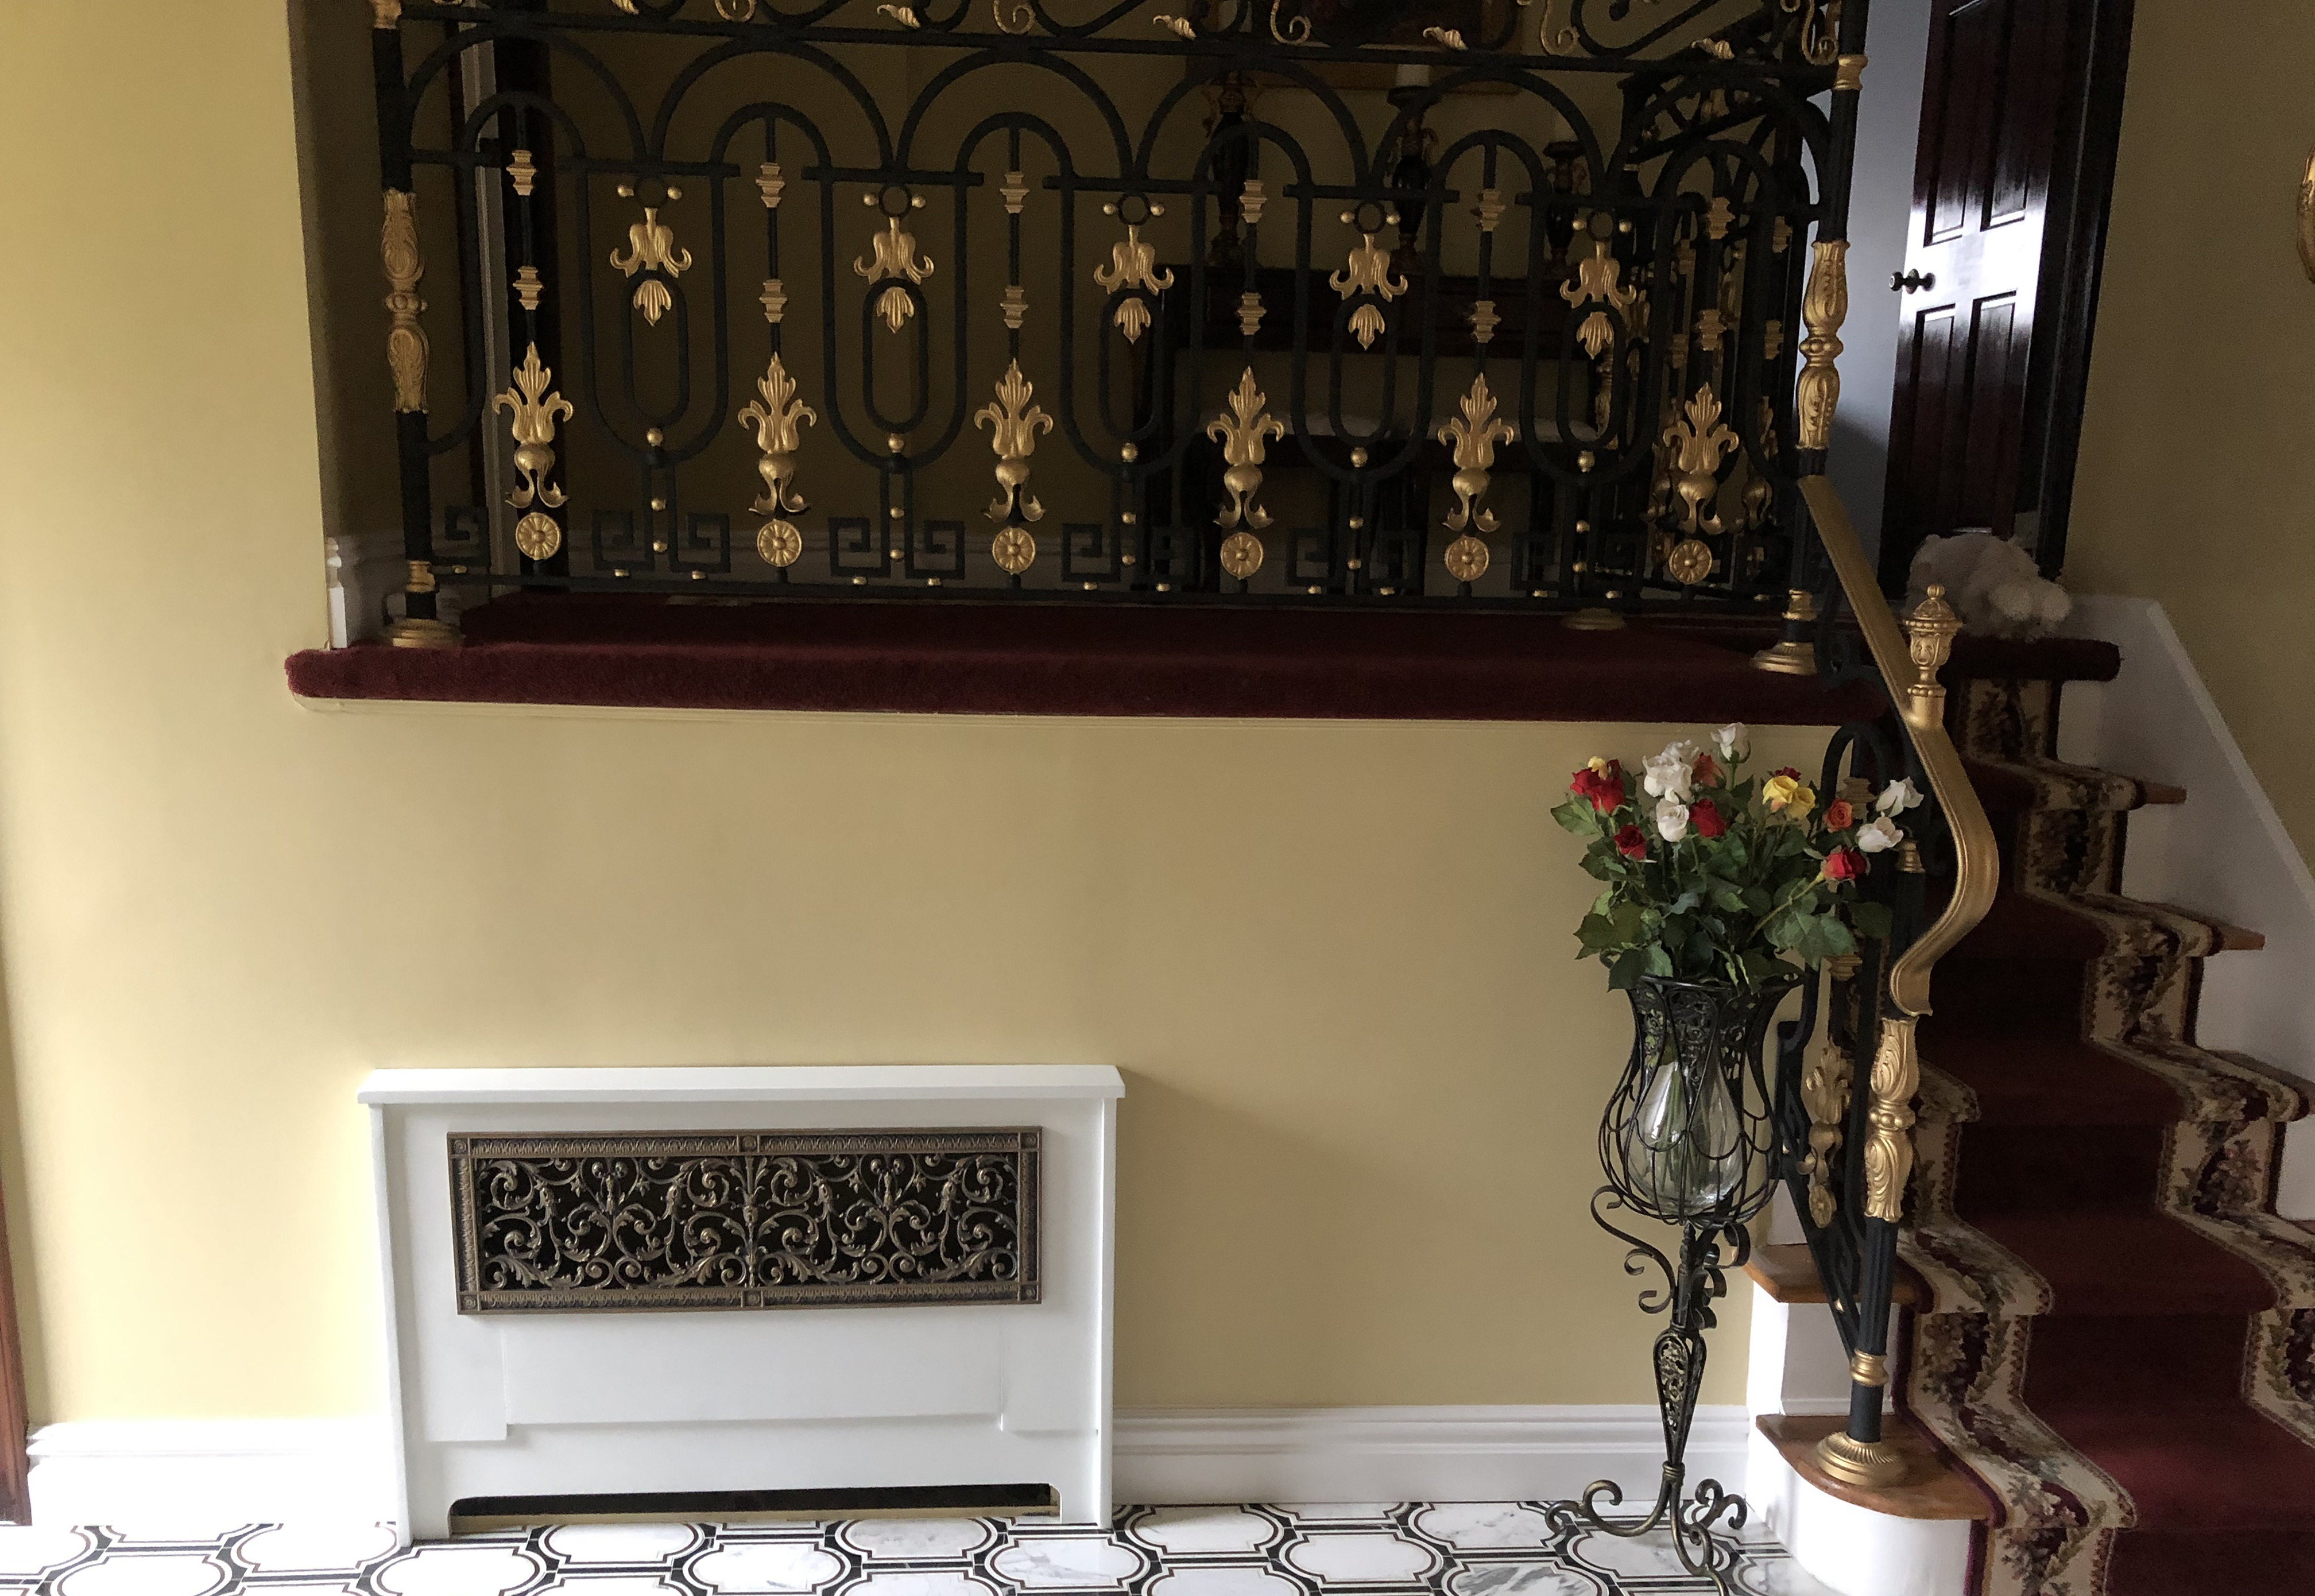 Fabulous radiator cover with our Louis XIV style decorative grille